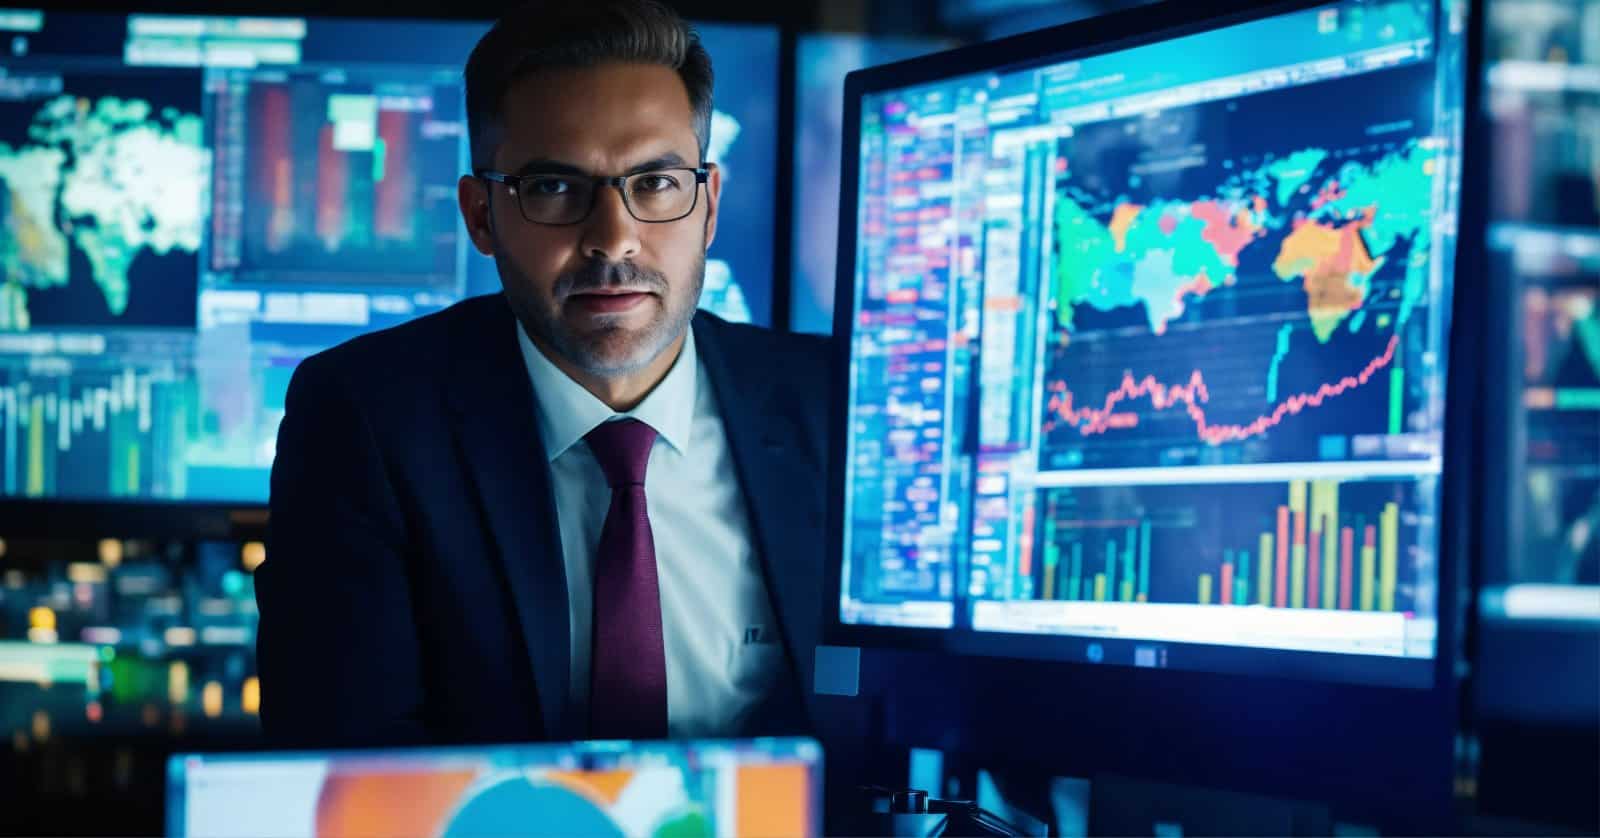 Actuarial analyst carefully examining business data on a computer, highlighting the meticulous and analytical nature of the actuarial profession.